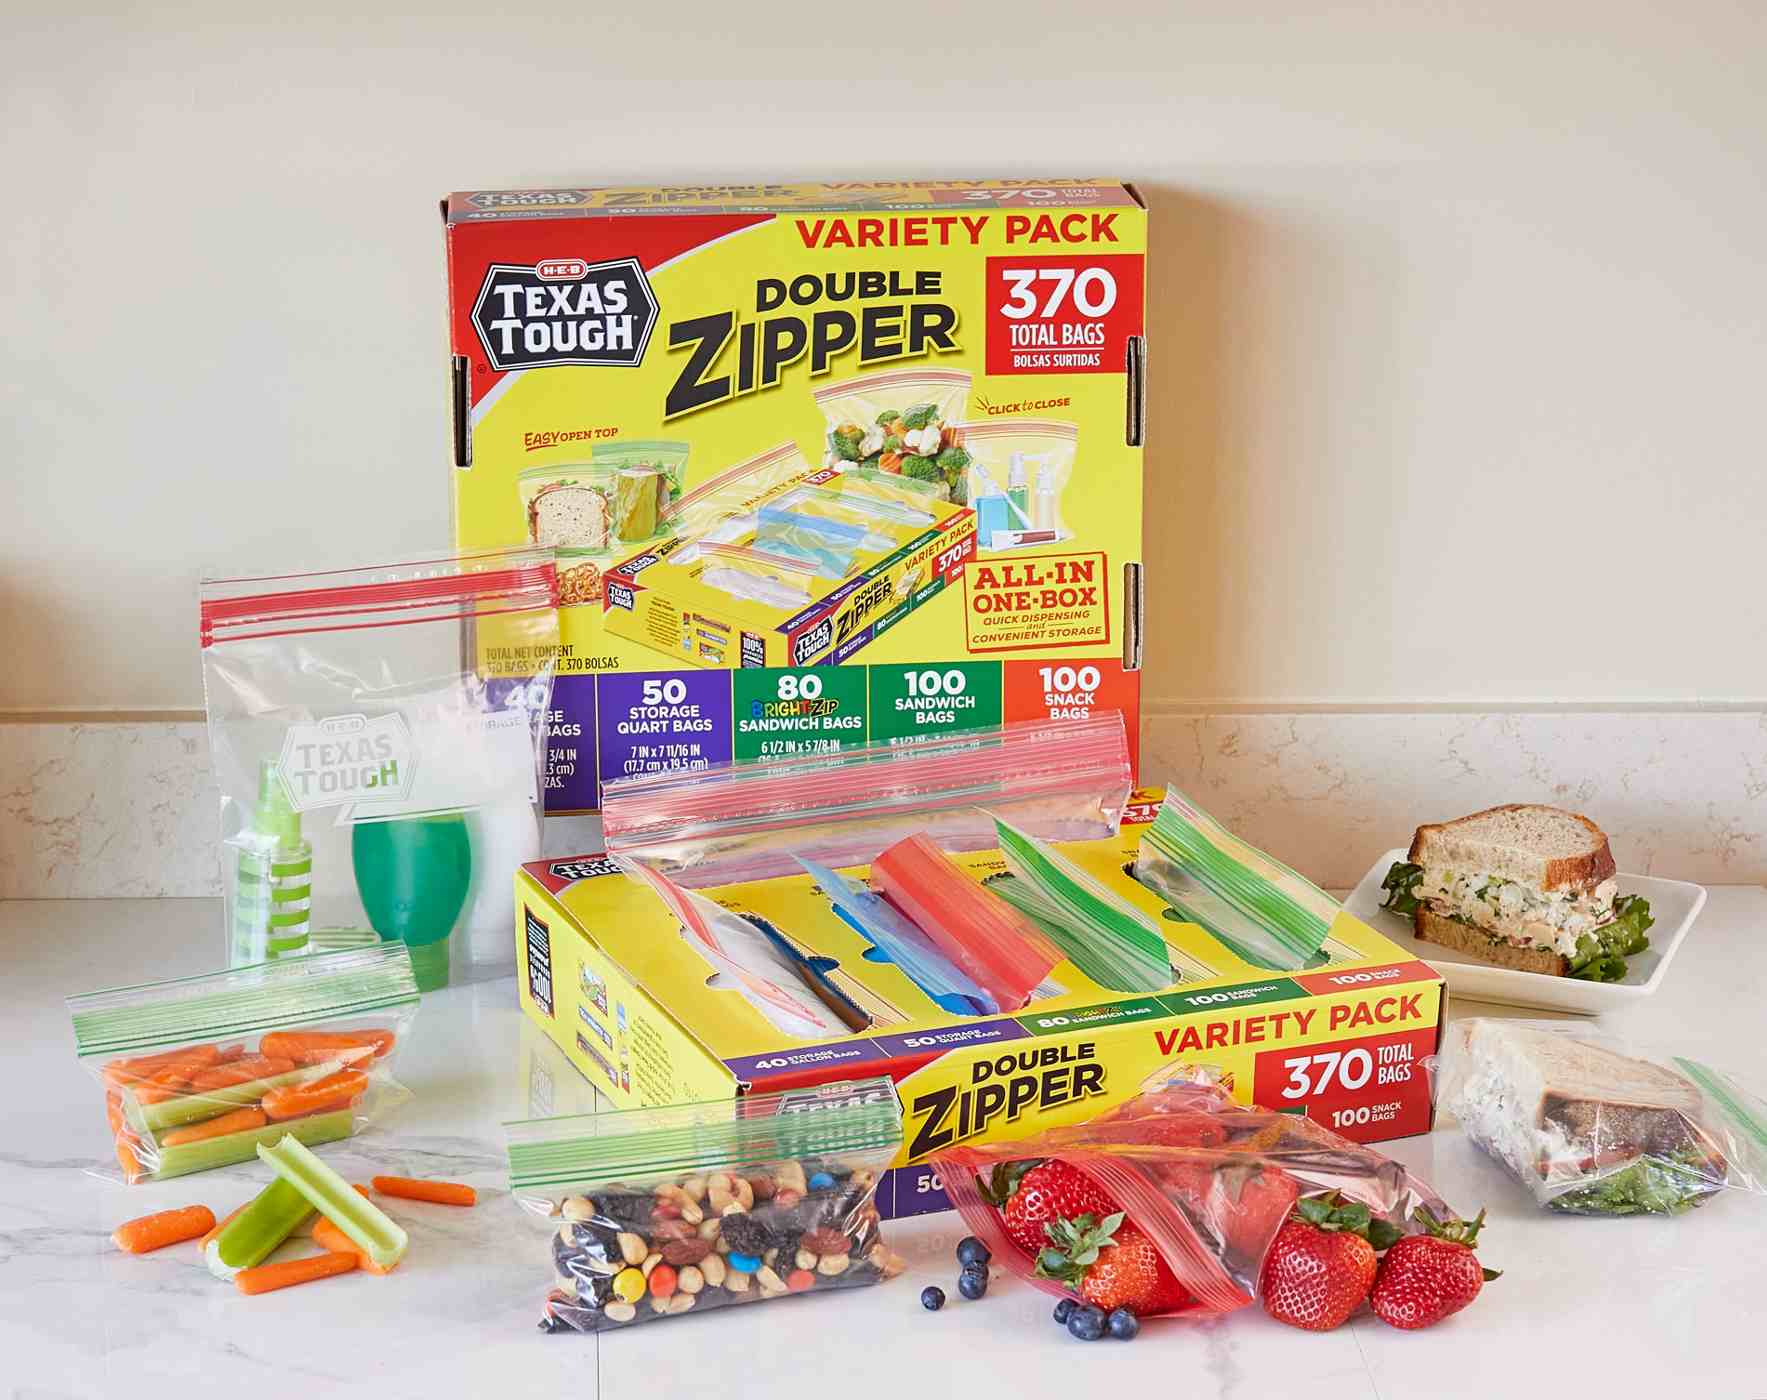 H-E-B Texas Tough Double Zipper Storage Bags - Variety Pack; image 3 of 3